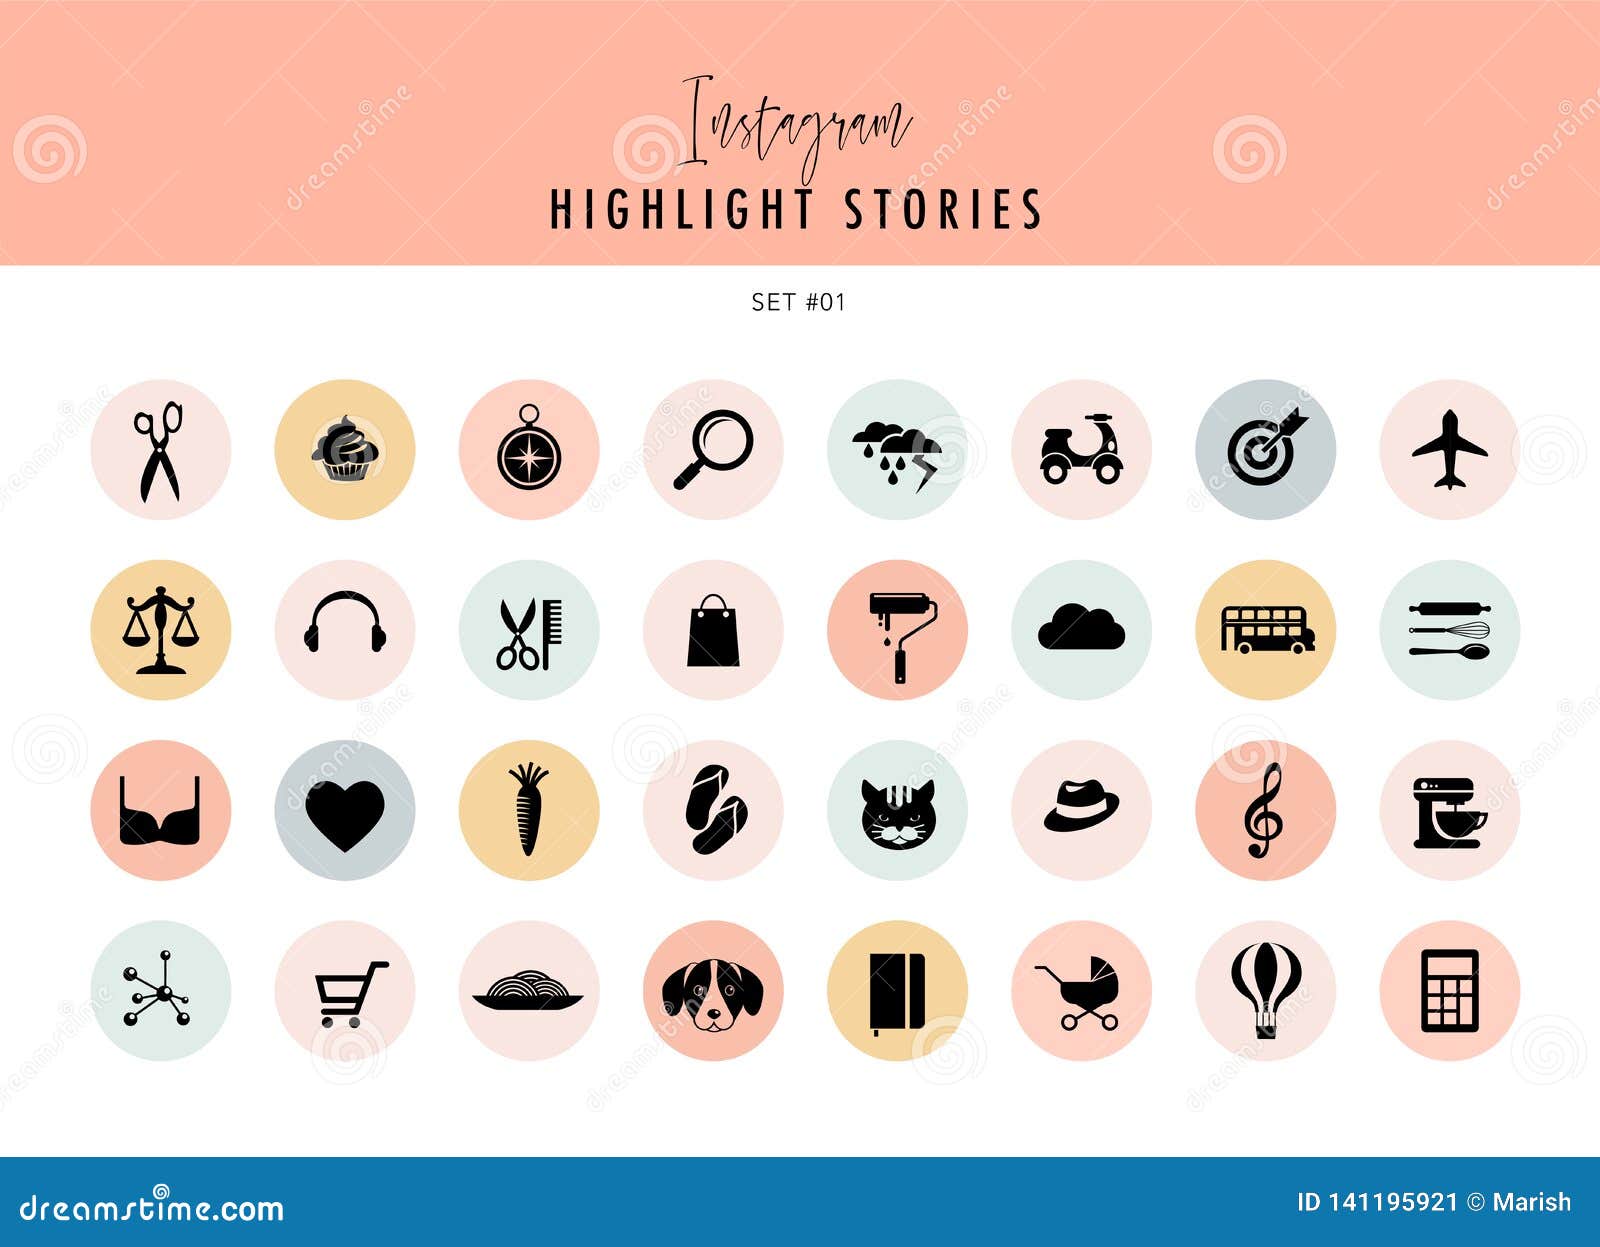 instagram highlights stories covers icons collection. fully editable, scalable  file